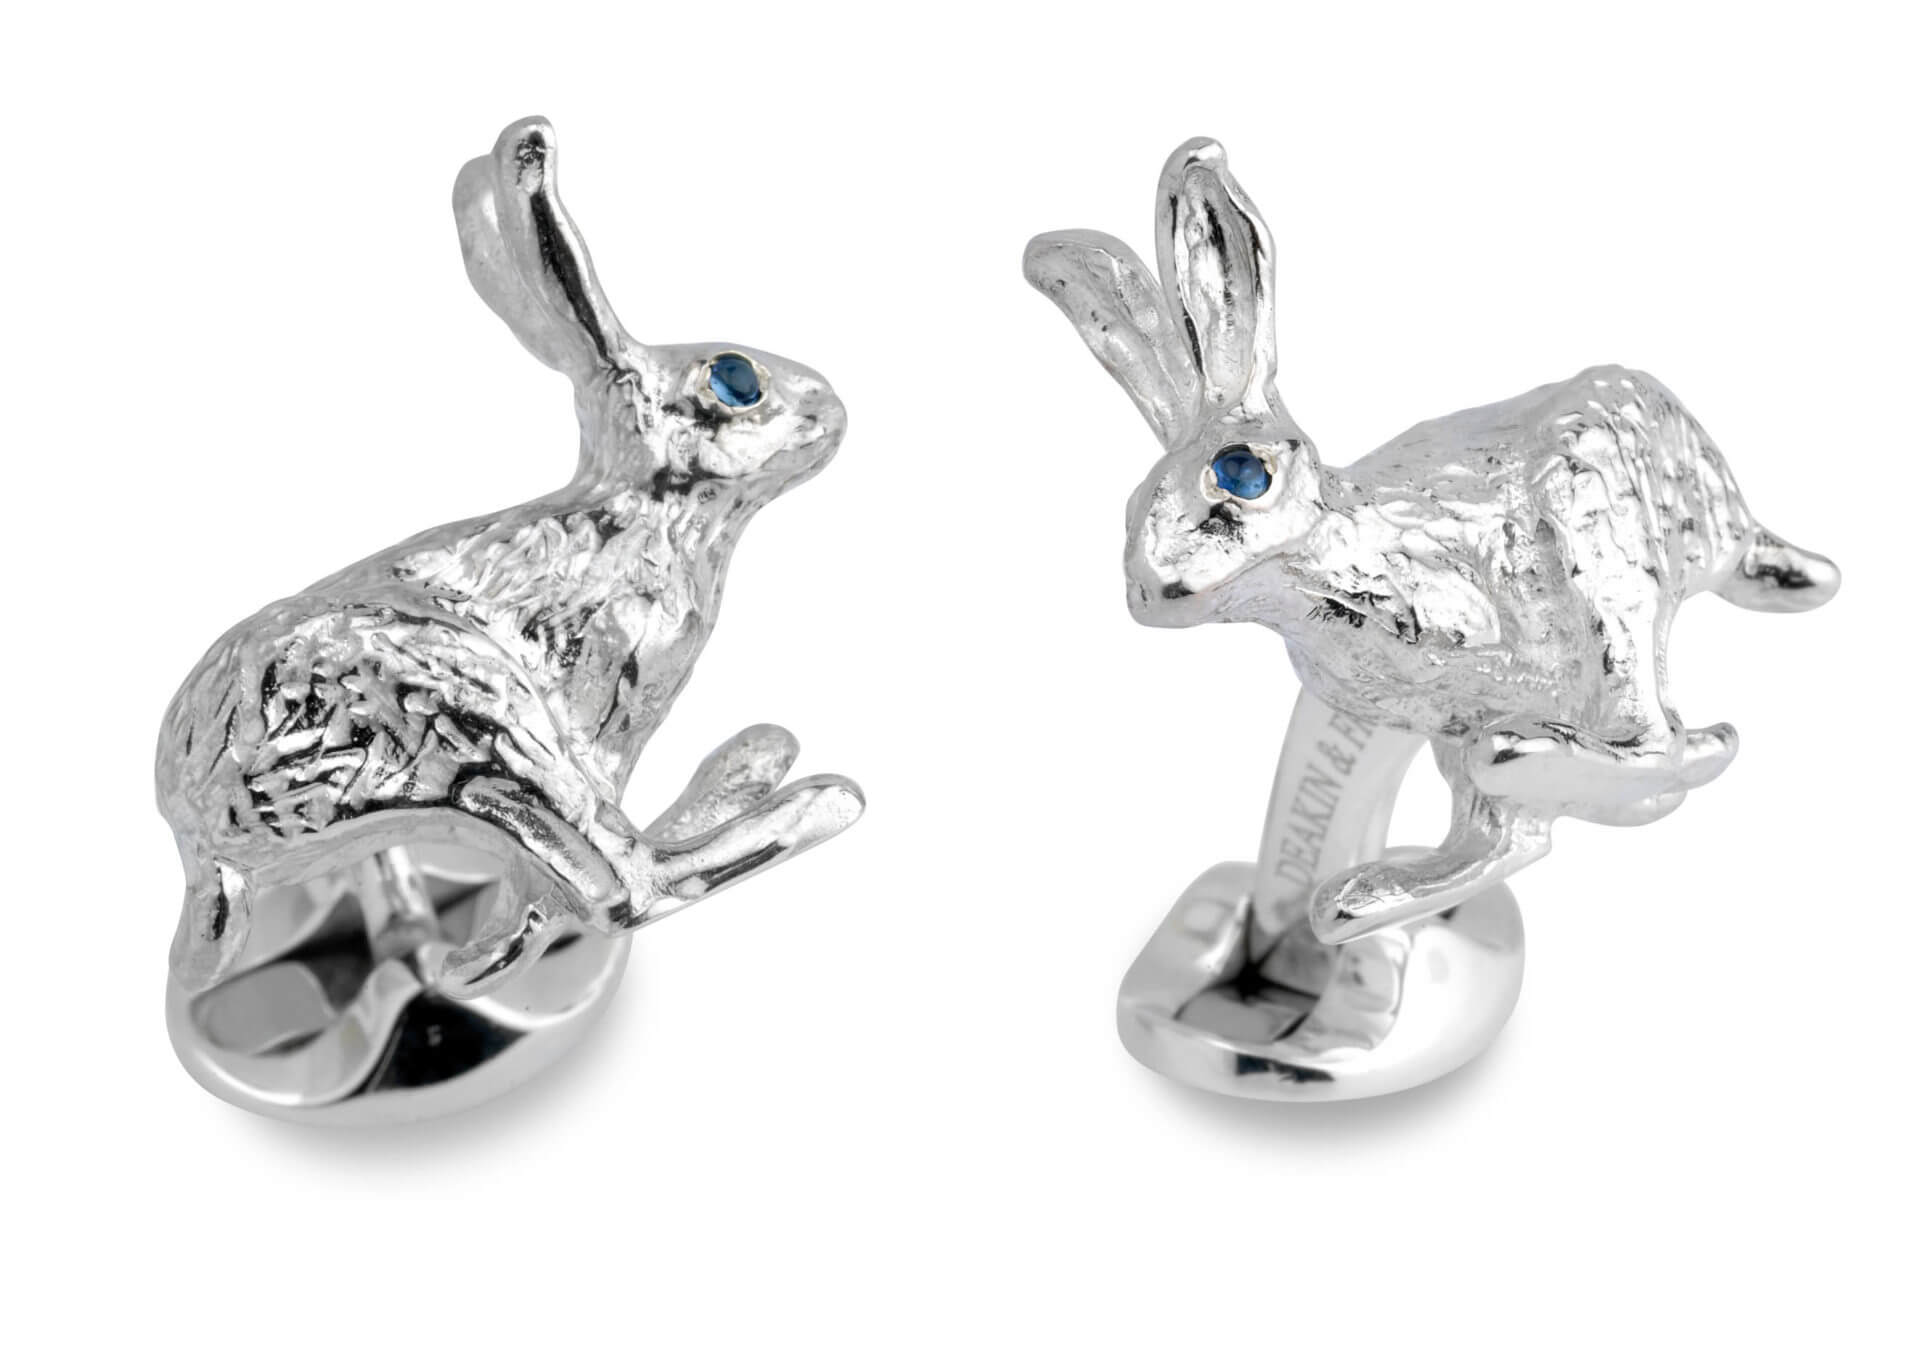 Sterling Silver Hare Cufflinks with Sapphire Eyes